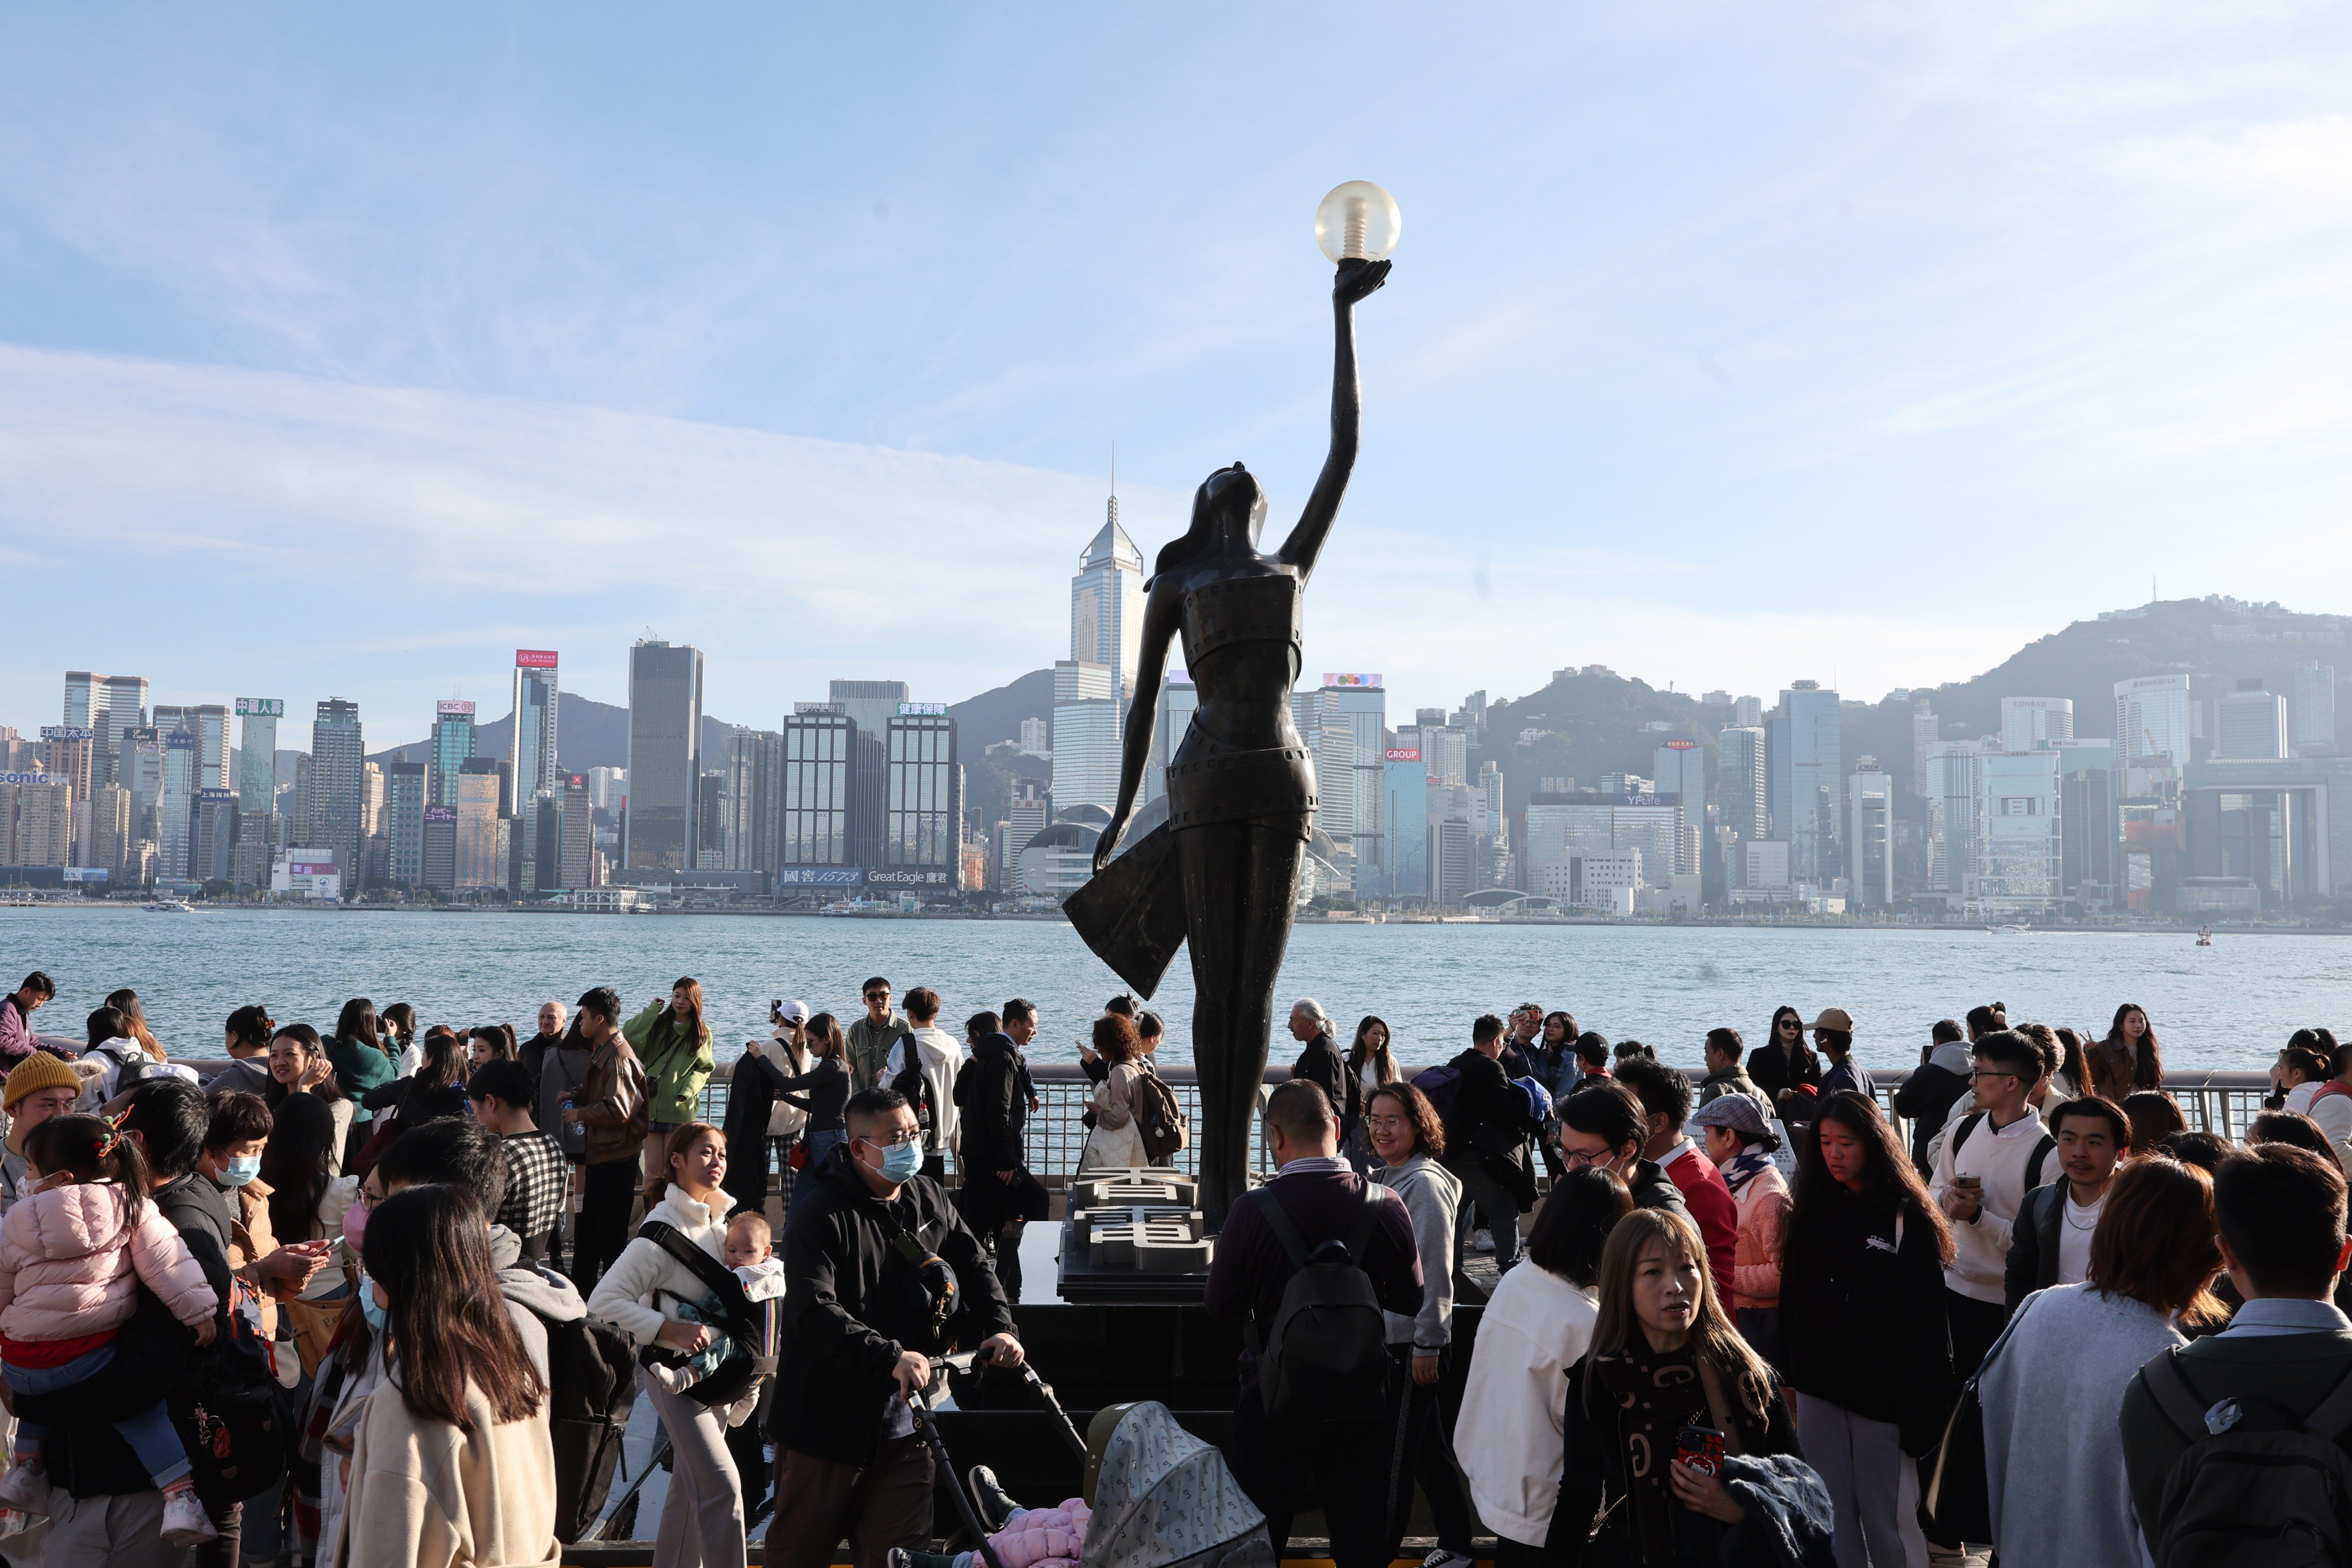 Overnight visitors list Tsim Sha Tsui (shown), the Temple Street and Ladies’ markets in Mong Kok, The Peak and Disneyland among Hong Kong’s most popular attractions. Photo: Edmond So